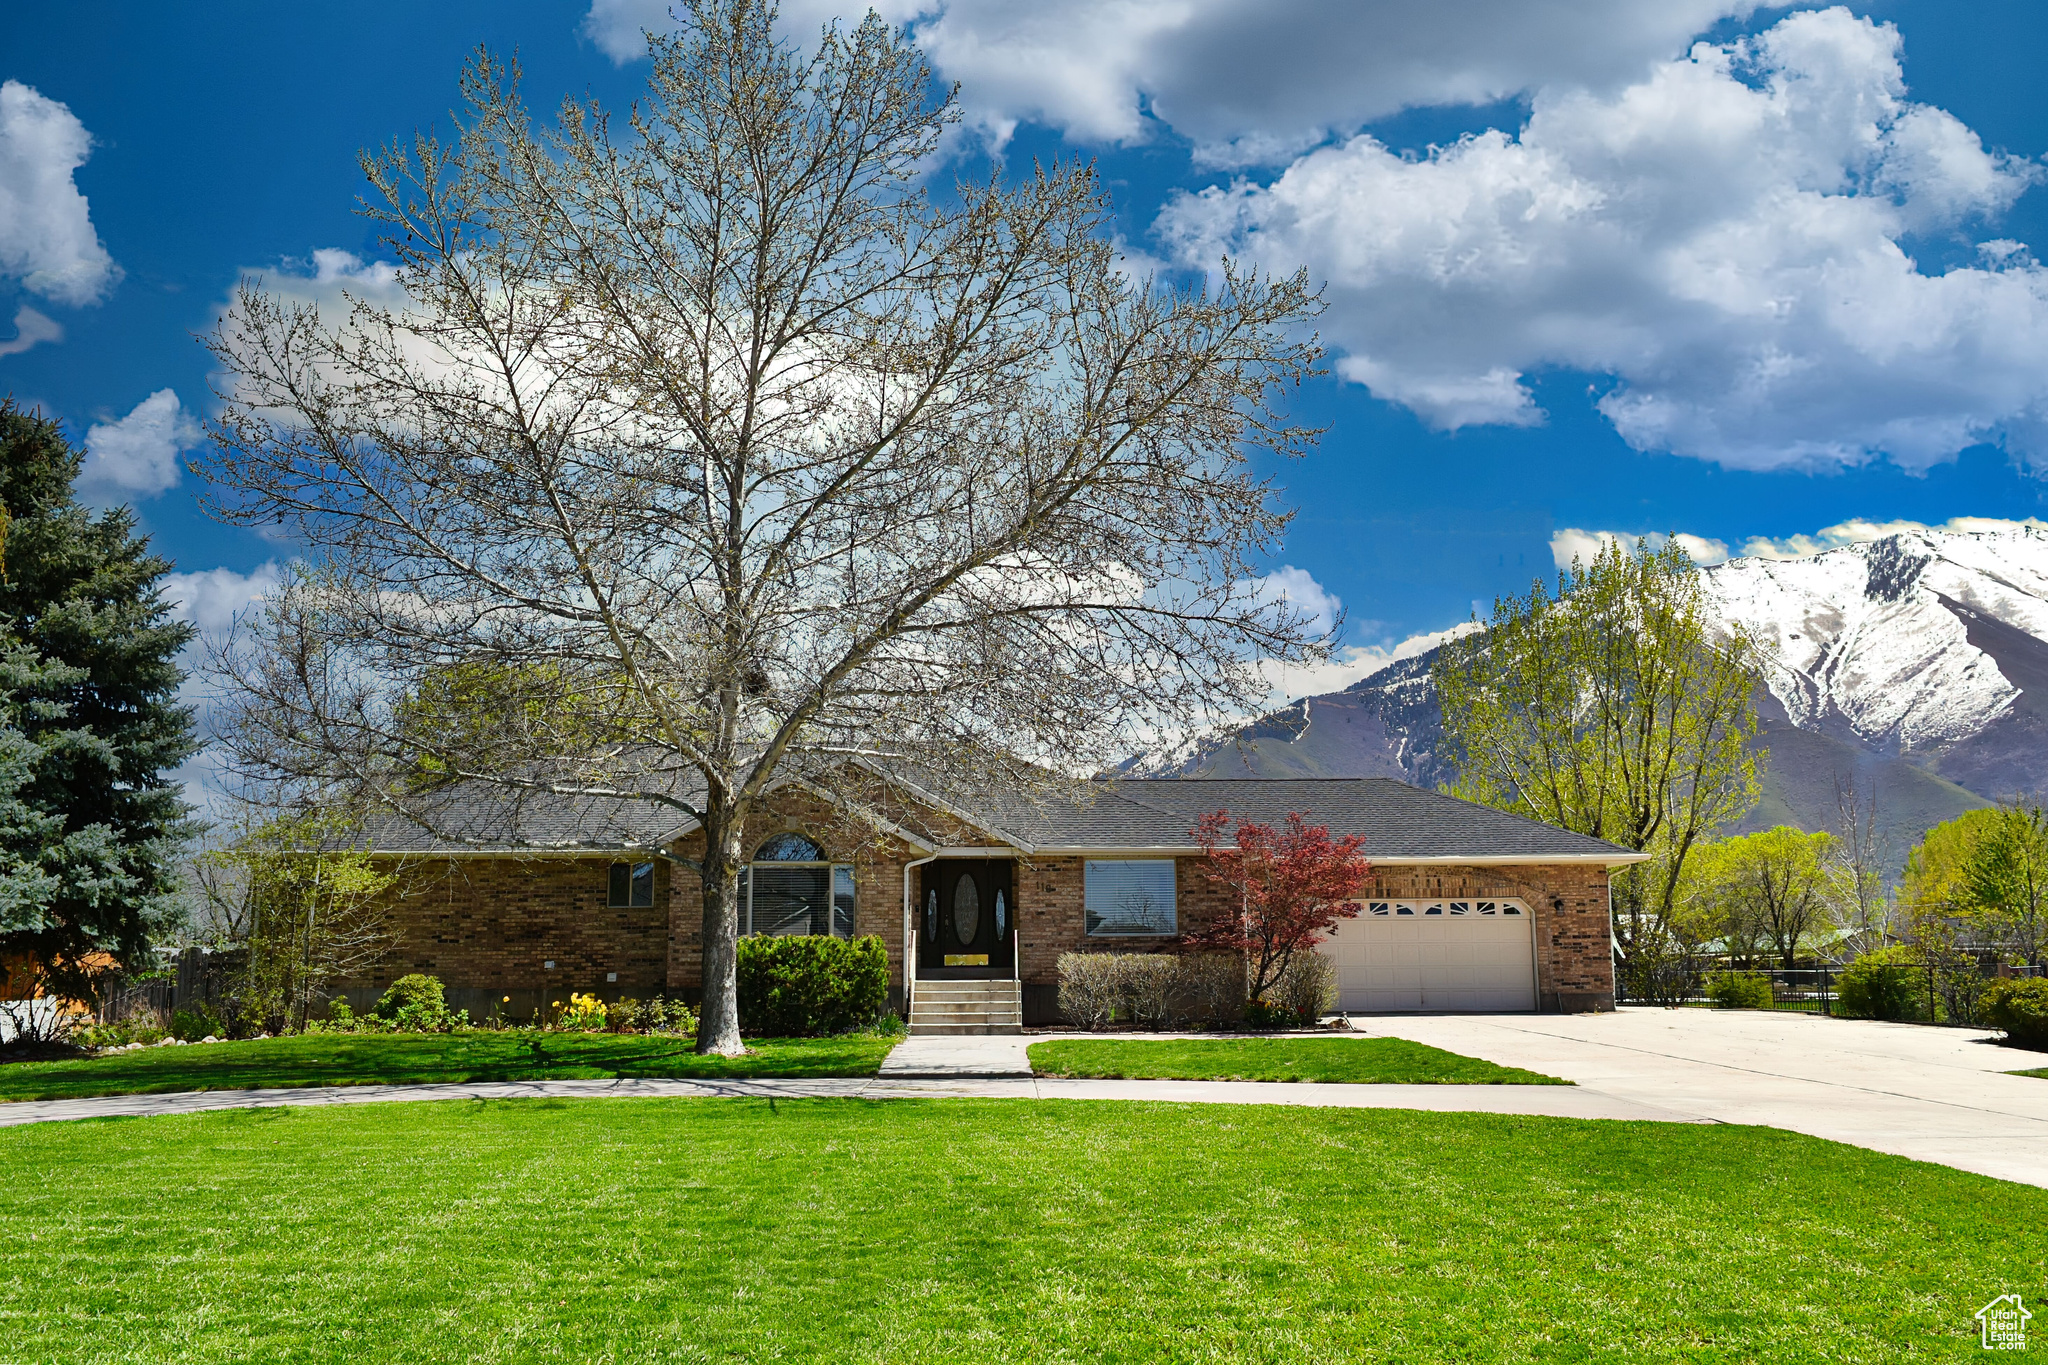 View of front of home featuring a garage, a mountain view, and a front yard